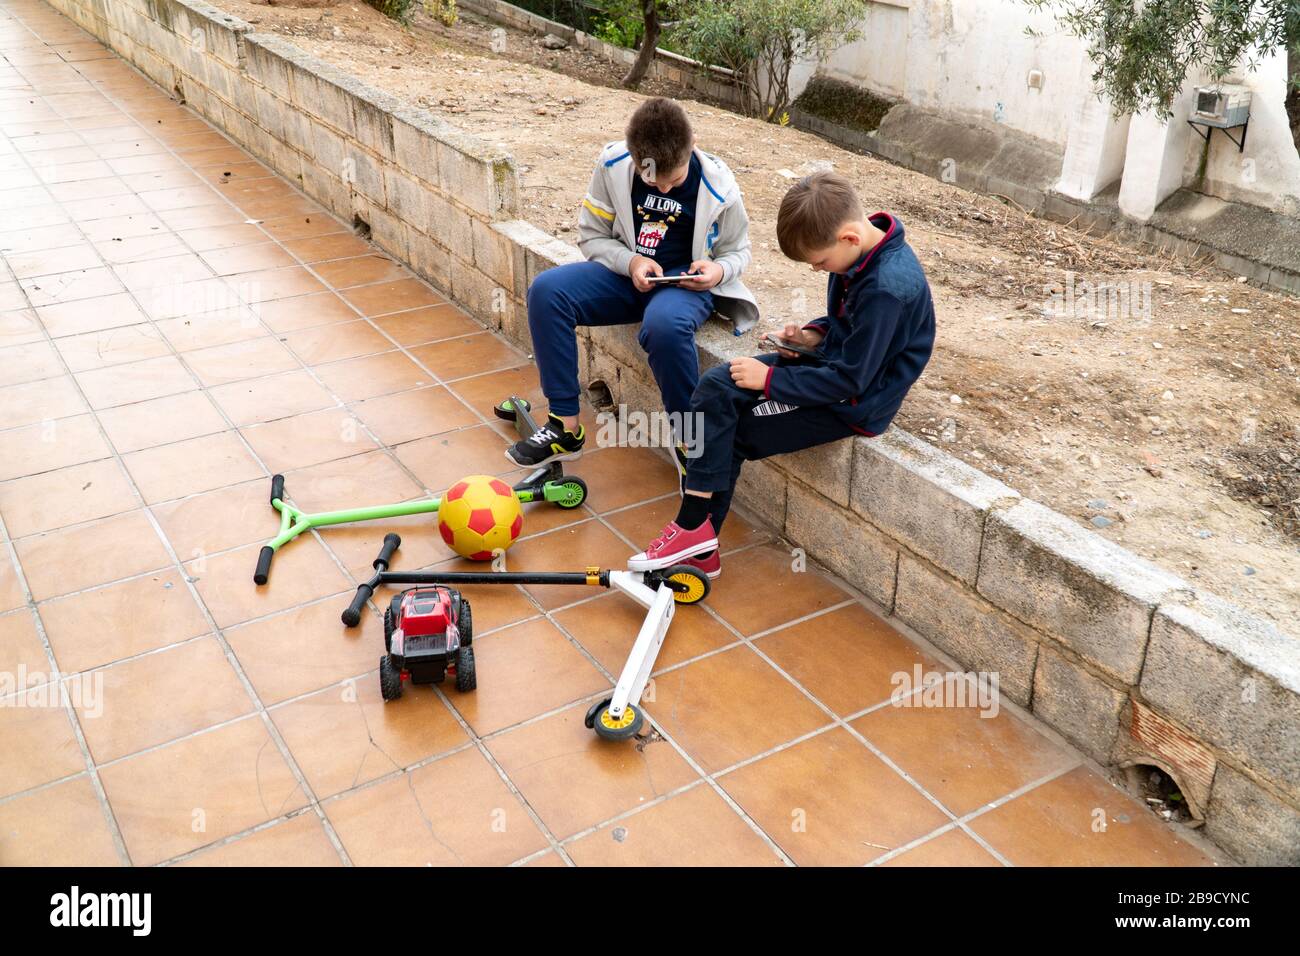 Mobile phone is a modern problem for children. Children play on the phone in the park. Toys and scooters are abandoned. Smartphone addiction in Stock Photo